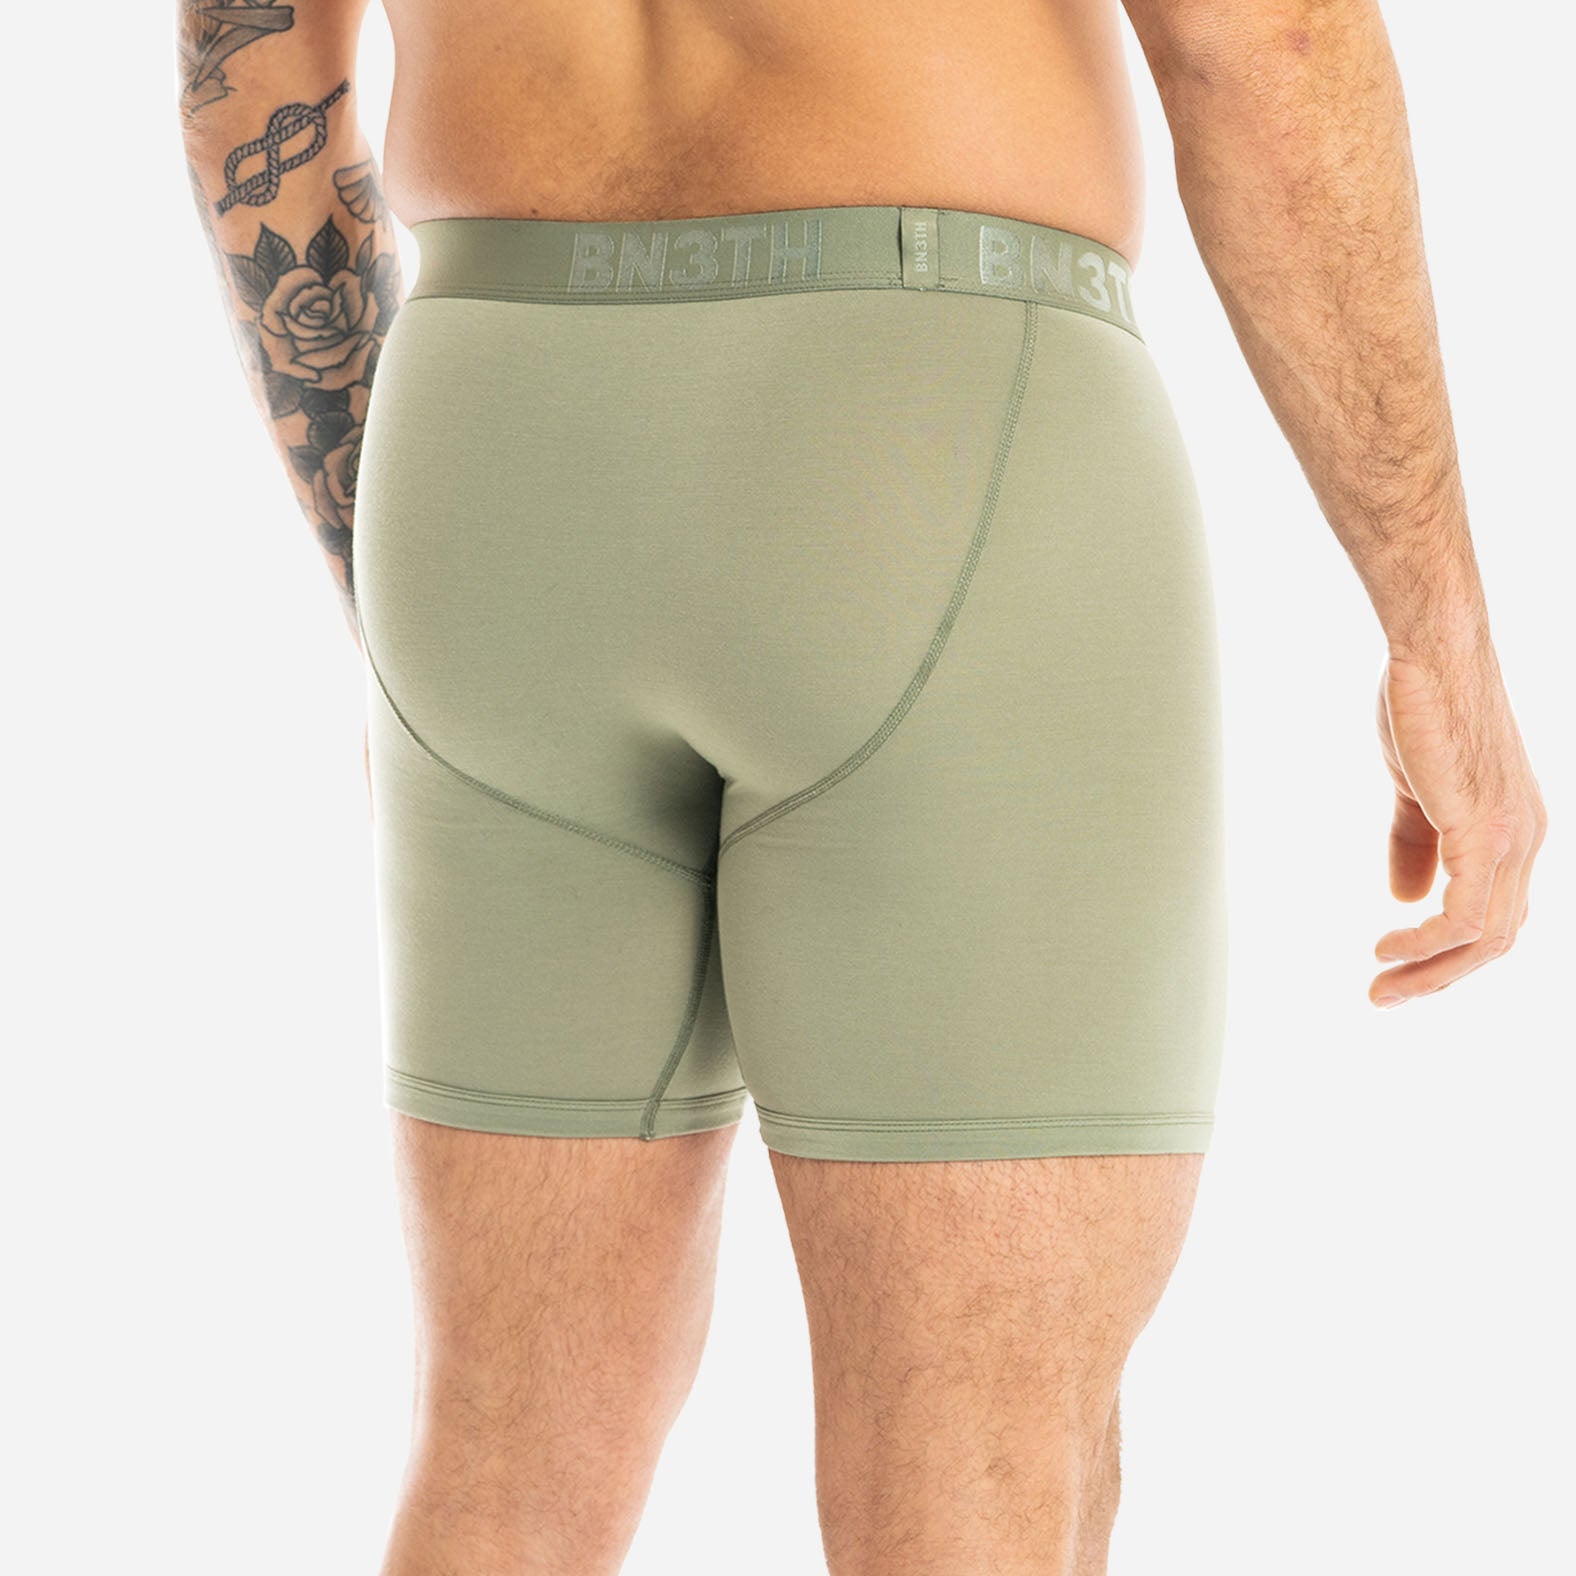 CLASSIC BOXER BRIEF: PINE/COVERT CAMO 2 PACK